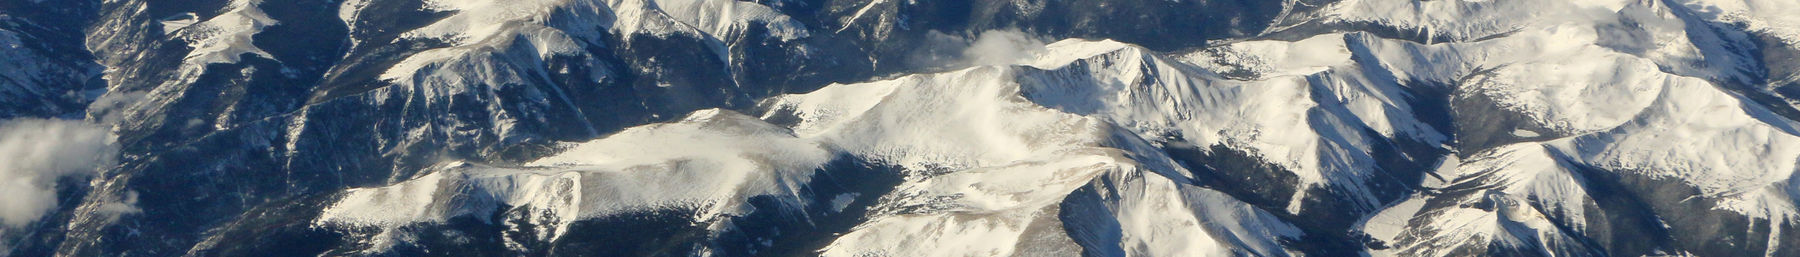 Rocky Mountains banners.jpg